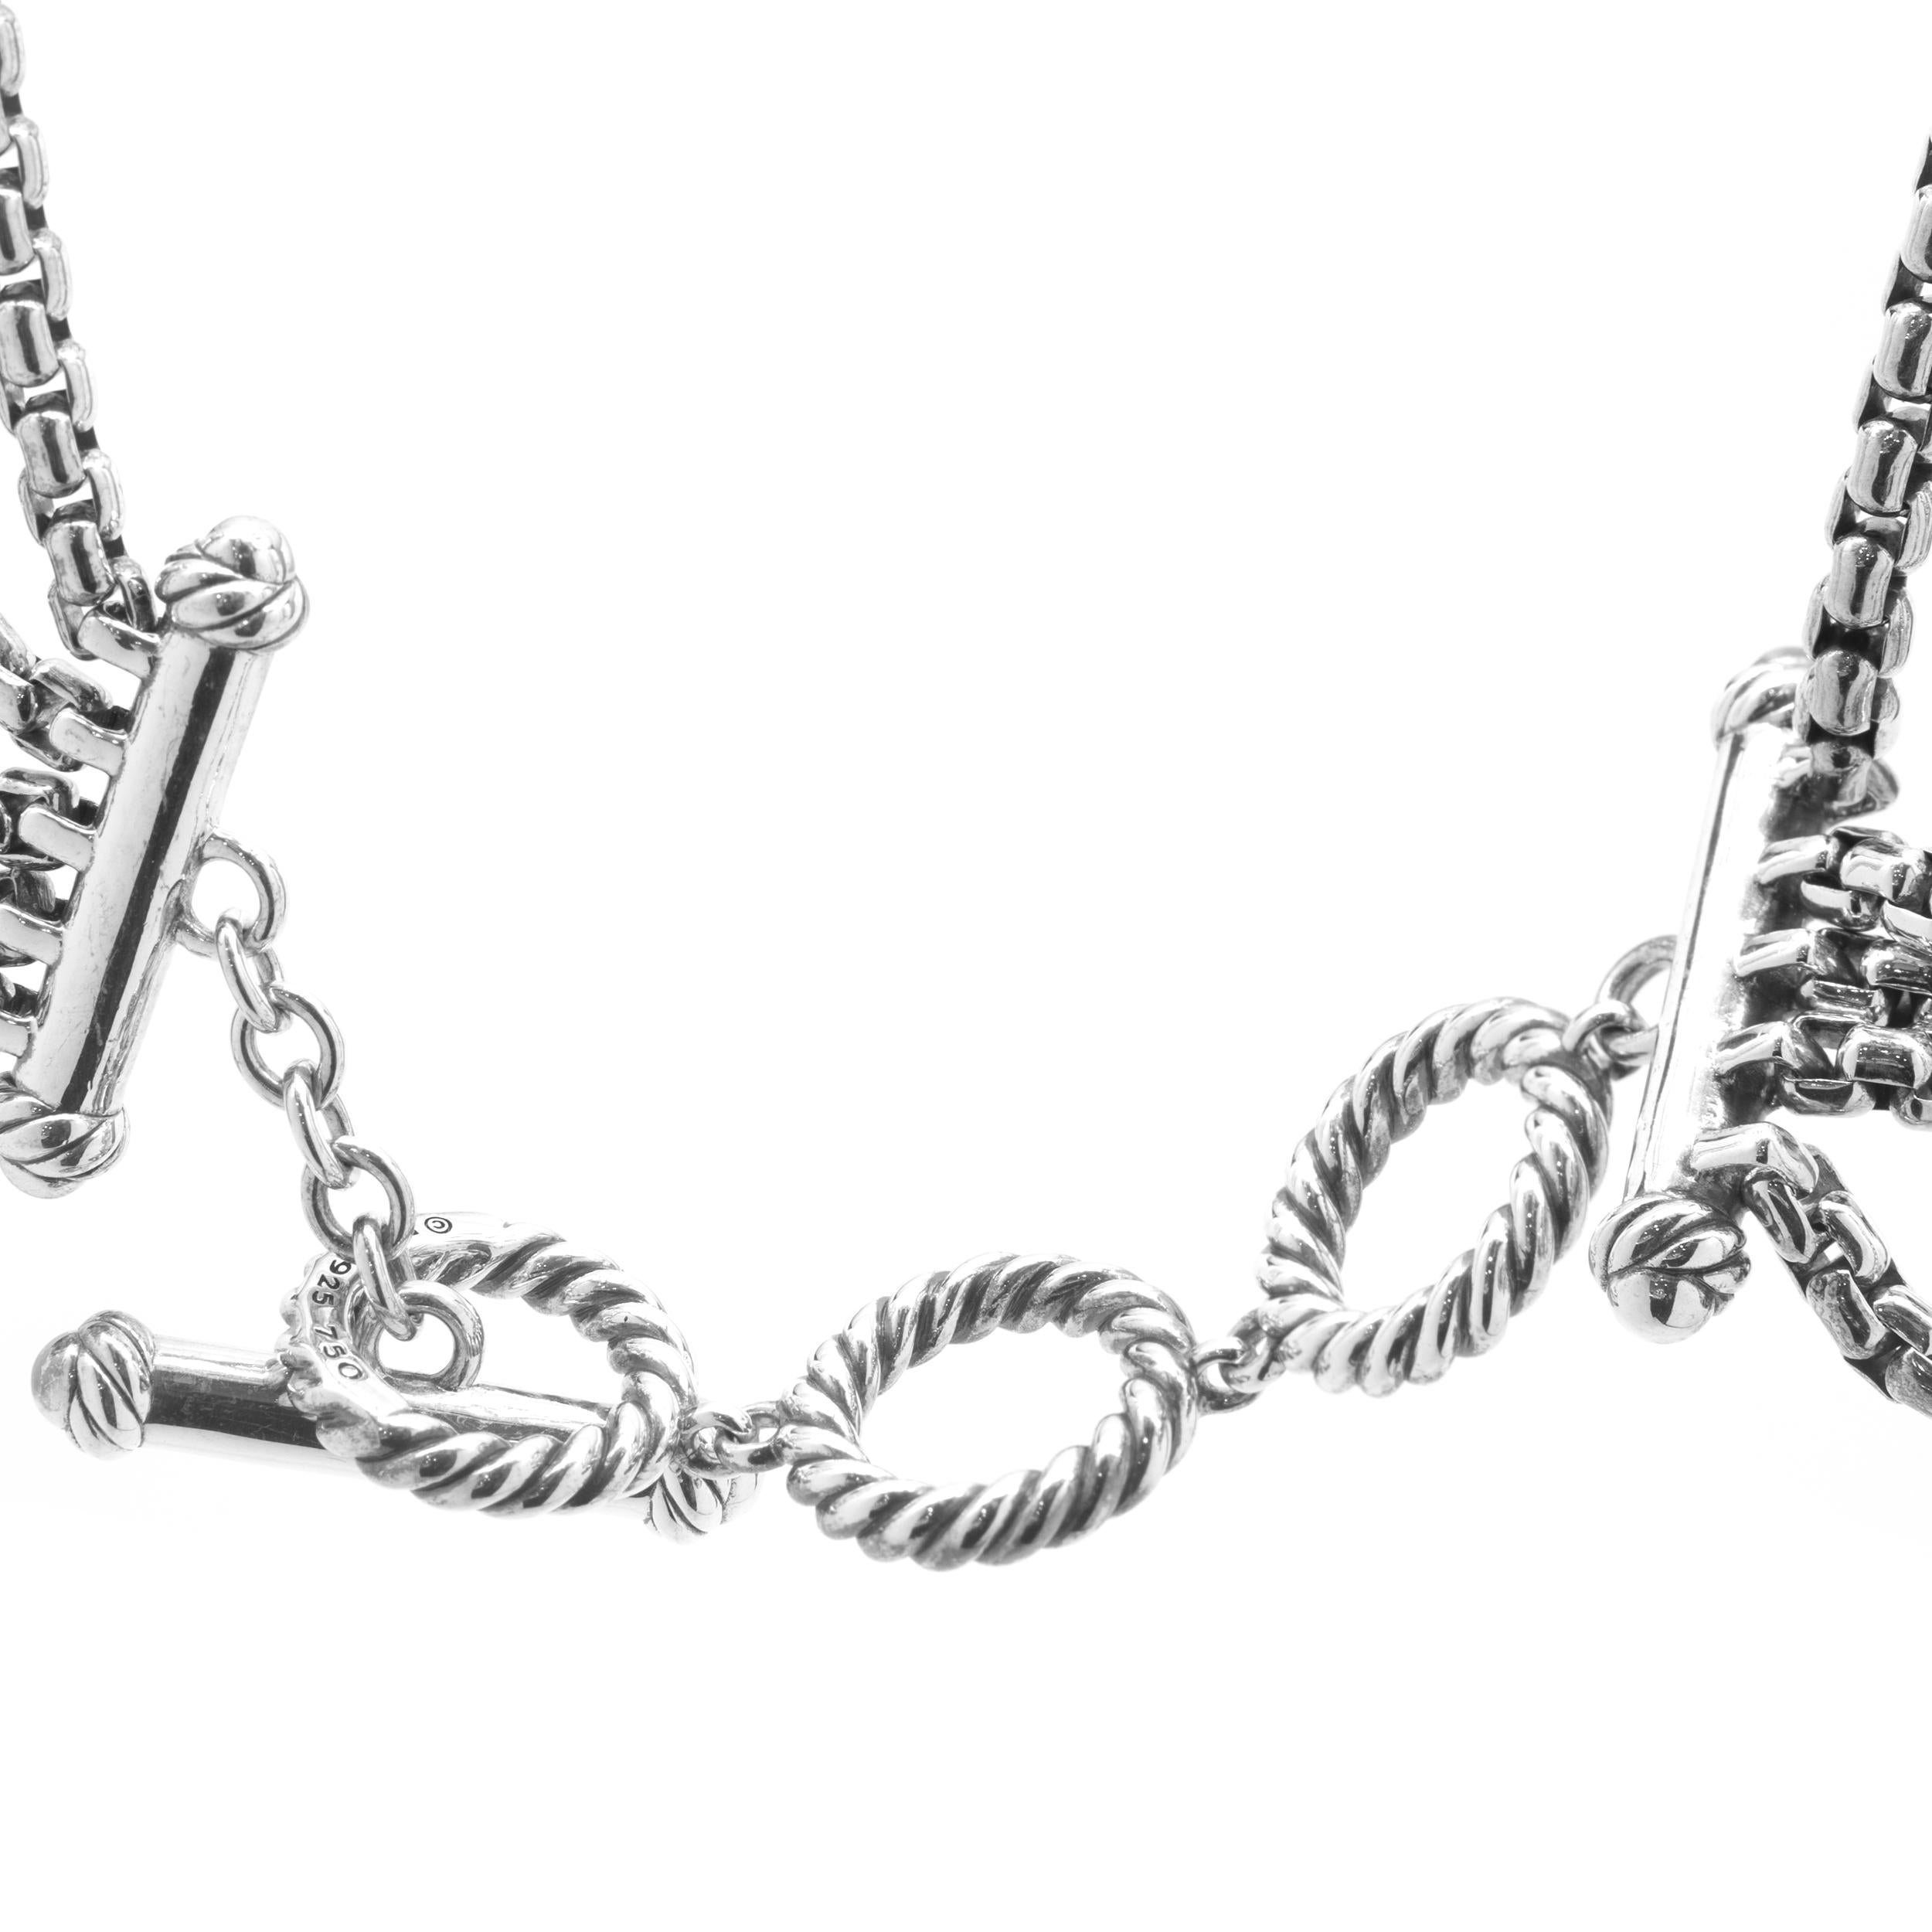 Designer: David Yurman
Material: sterling silver
Dimensions: necklace measures 18-inches long
Weight: 150.29 grams
